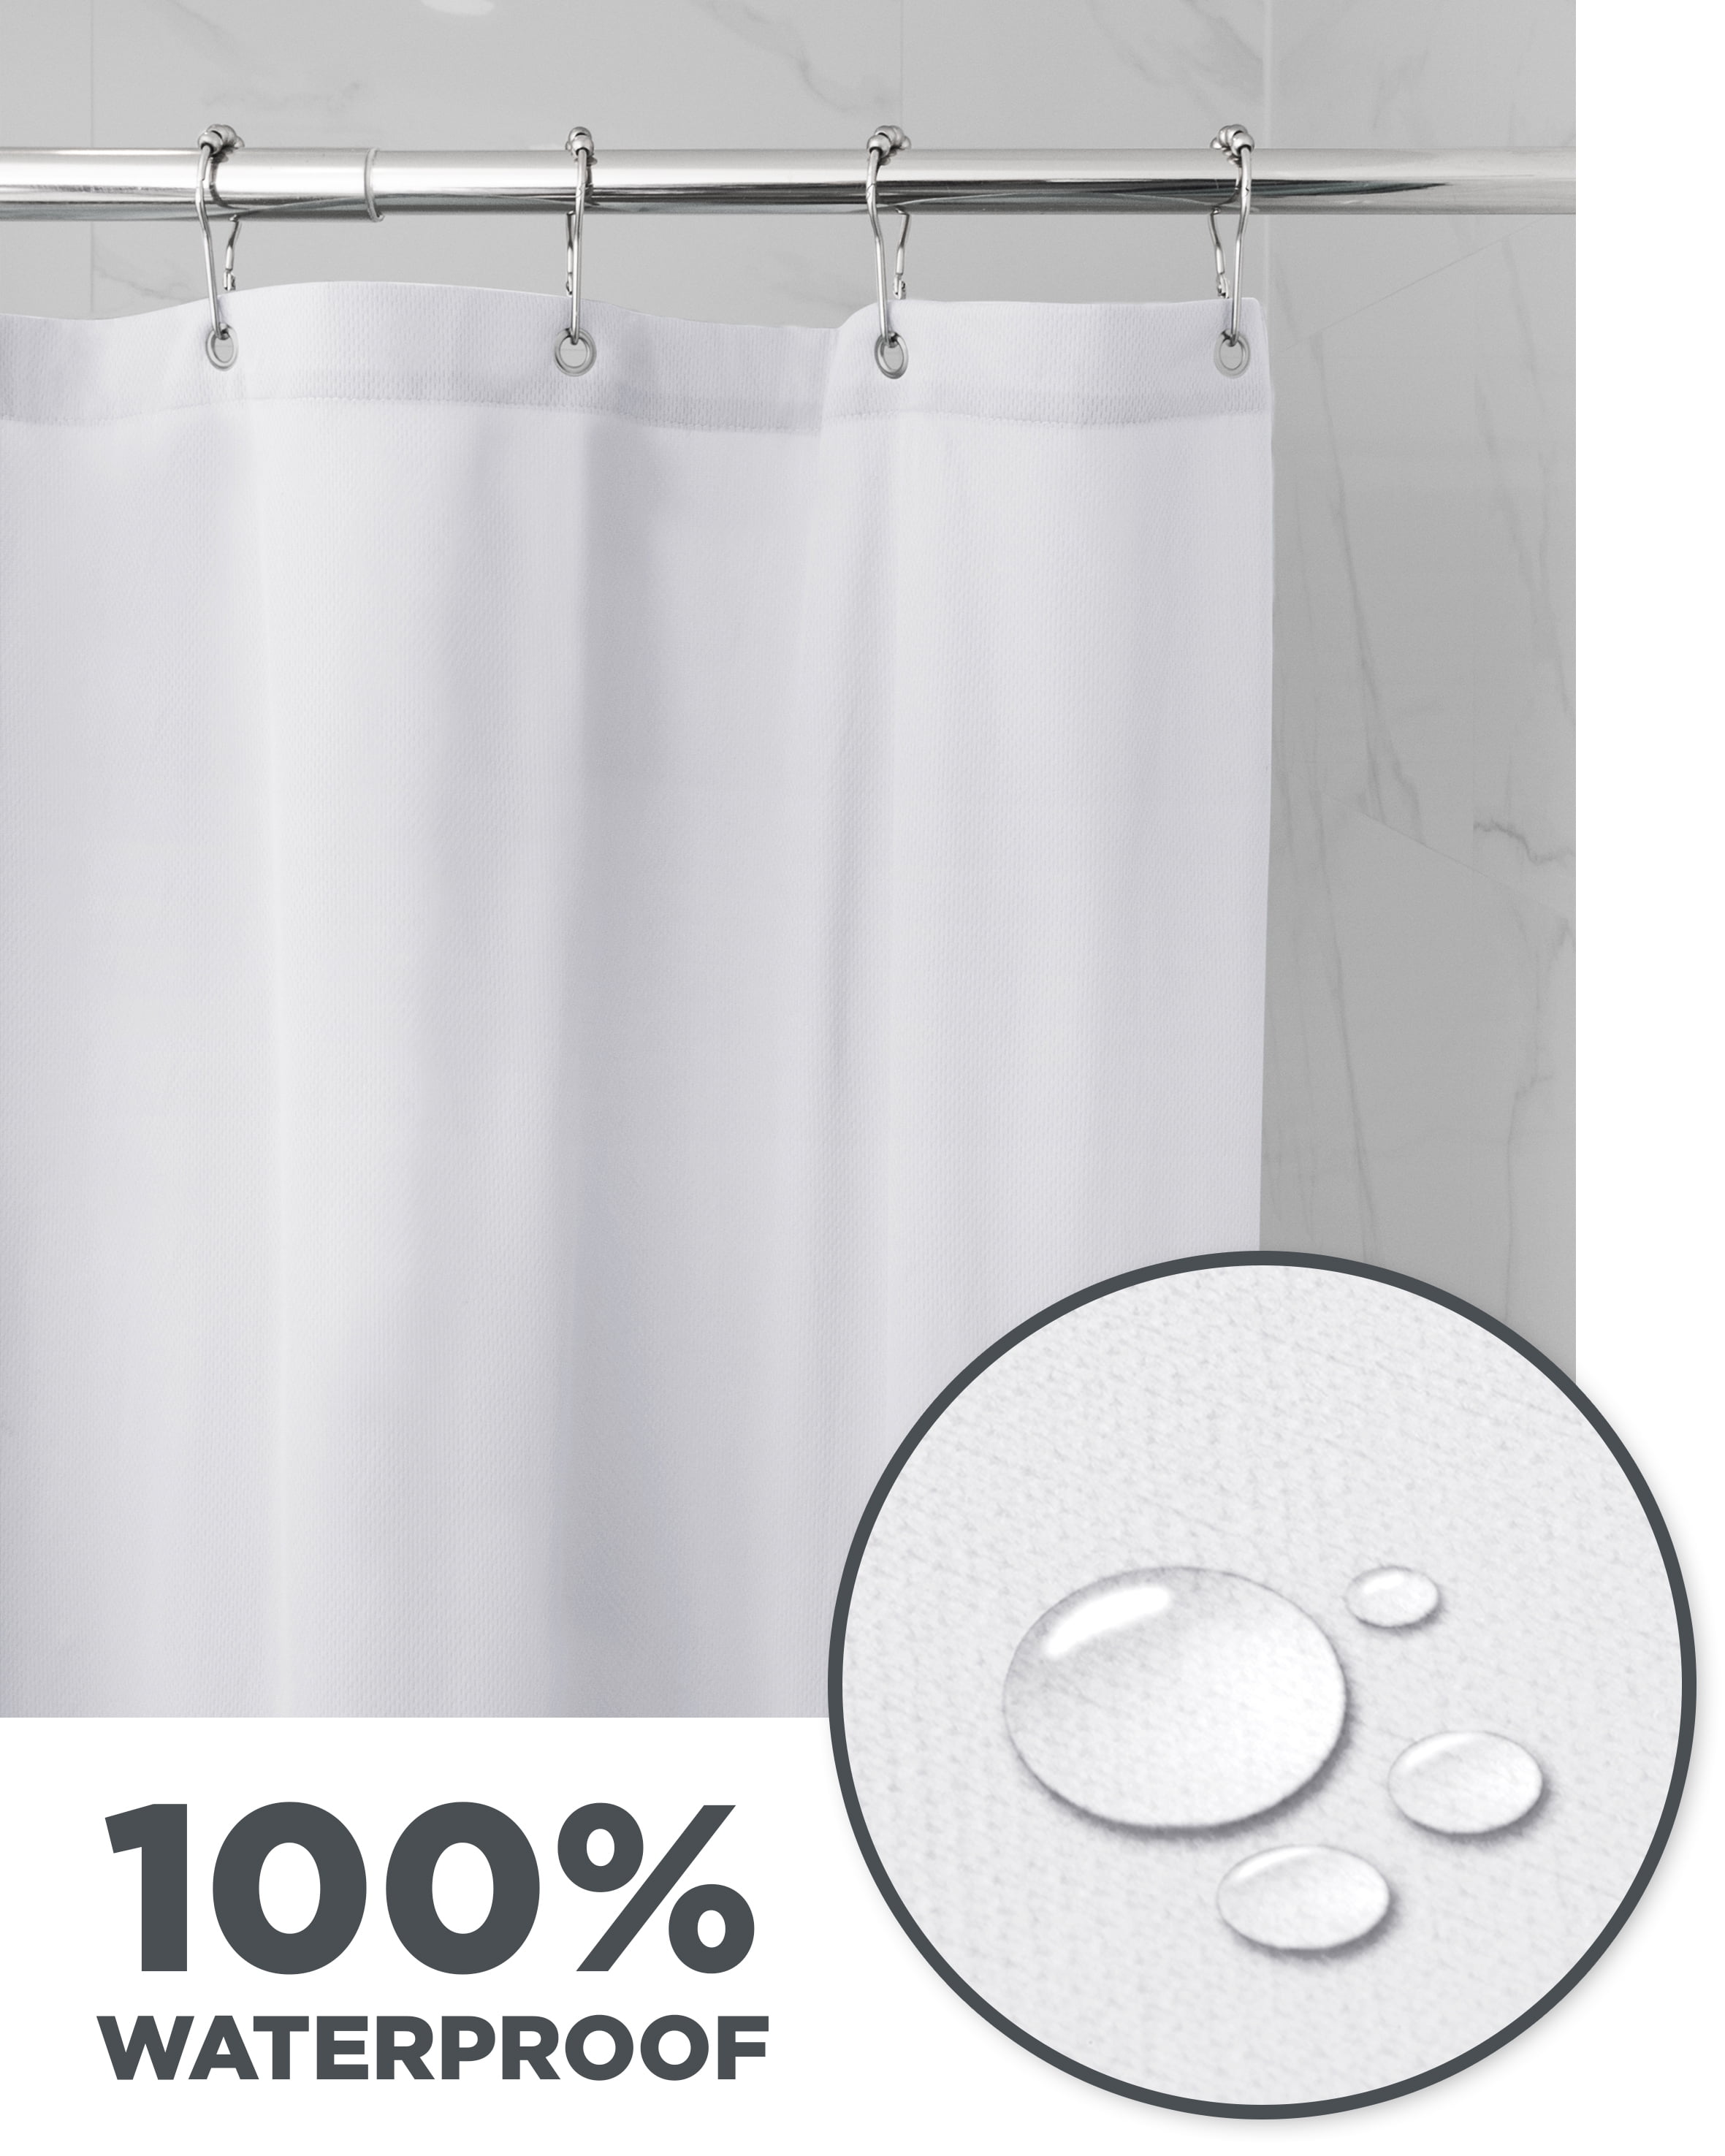 Better Homes & Gardens Ultimate Shield Solid 100% Waterproof Fabric Shower Curtain Liner - White - 70 x 72 in